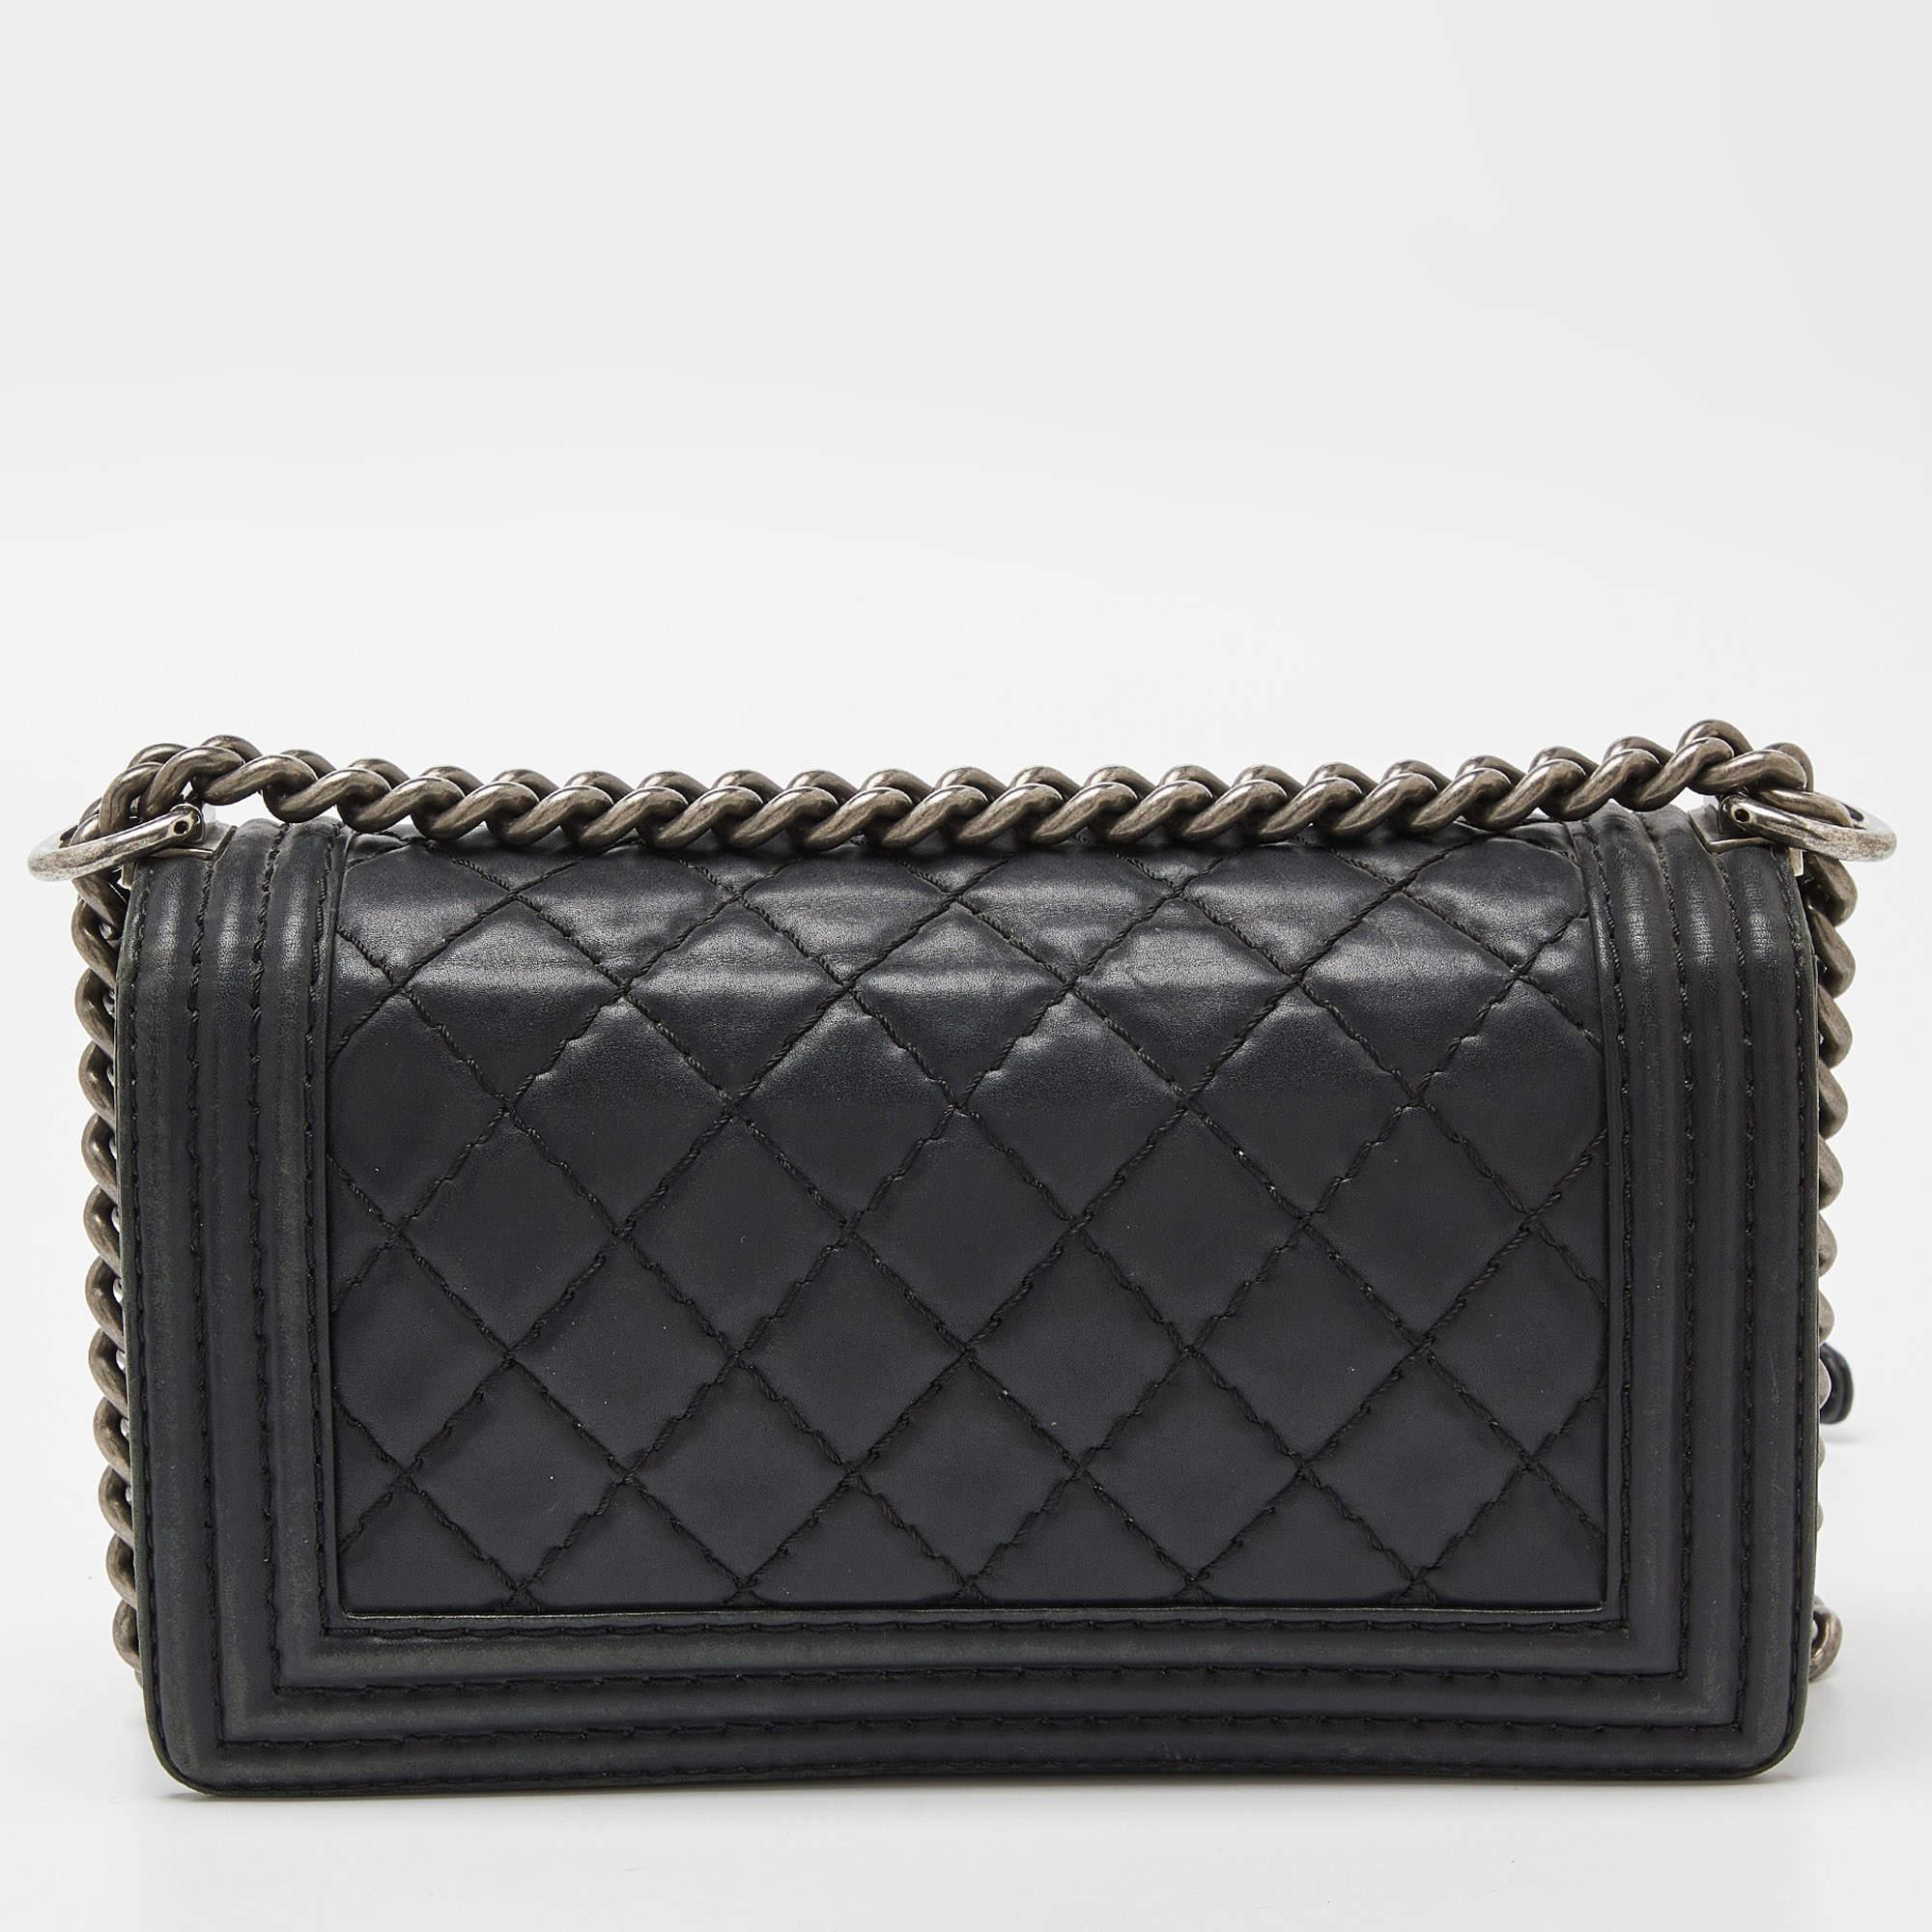 Trust this Chanel Boy bag to be stylish, durable, and comfortable to carry. It is crafted beautifully using the best materials to be a durable style ally.

